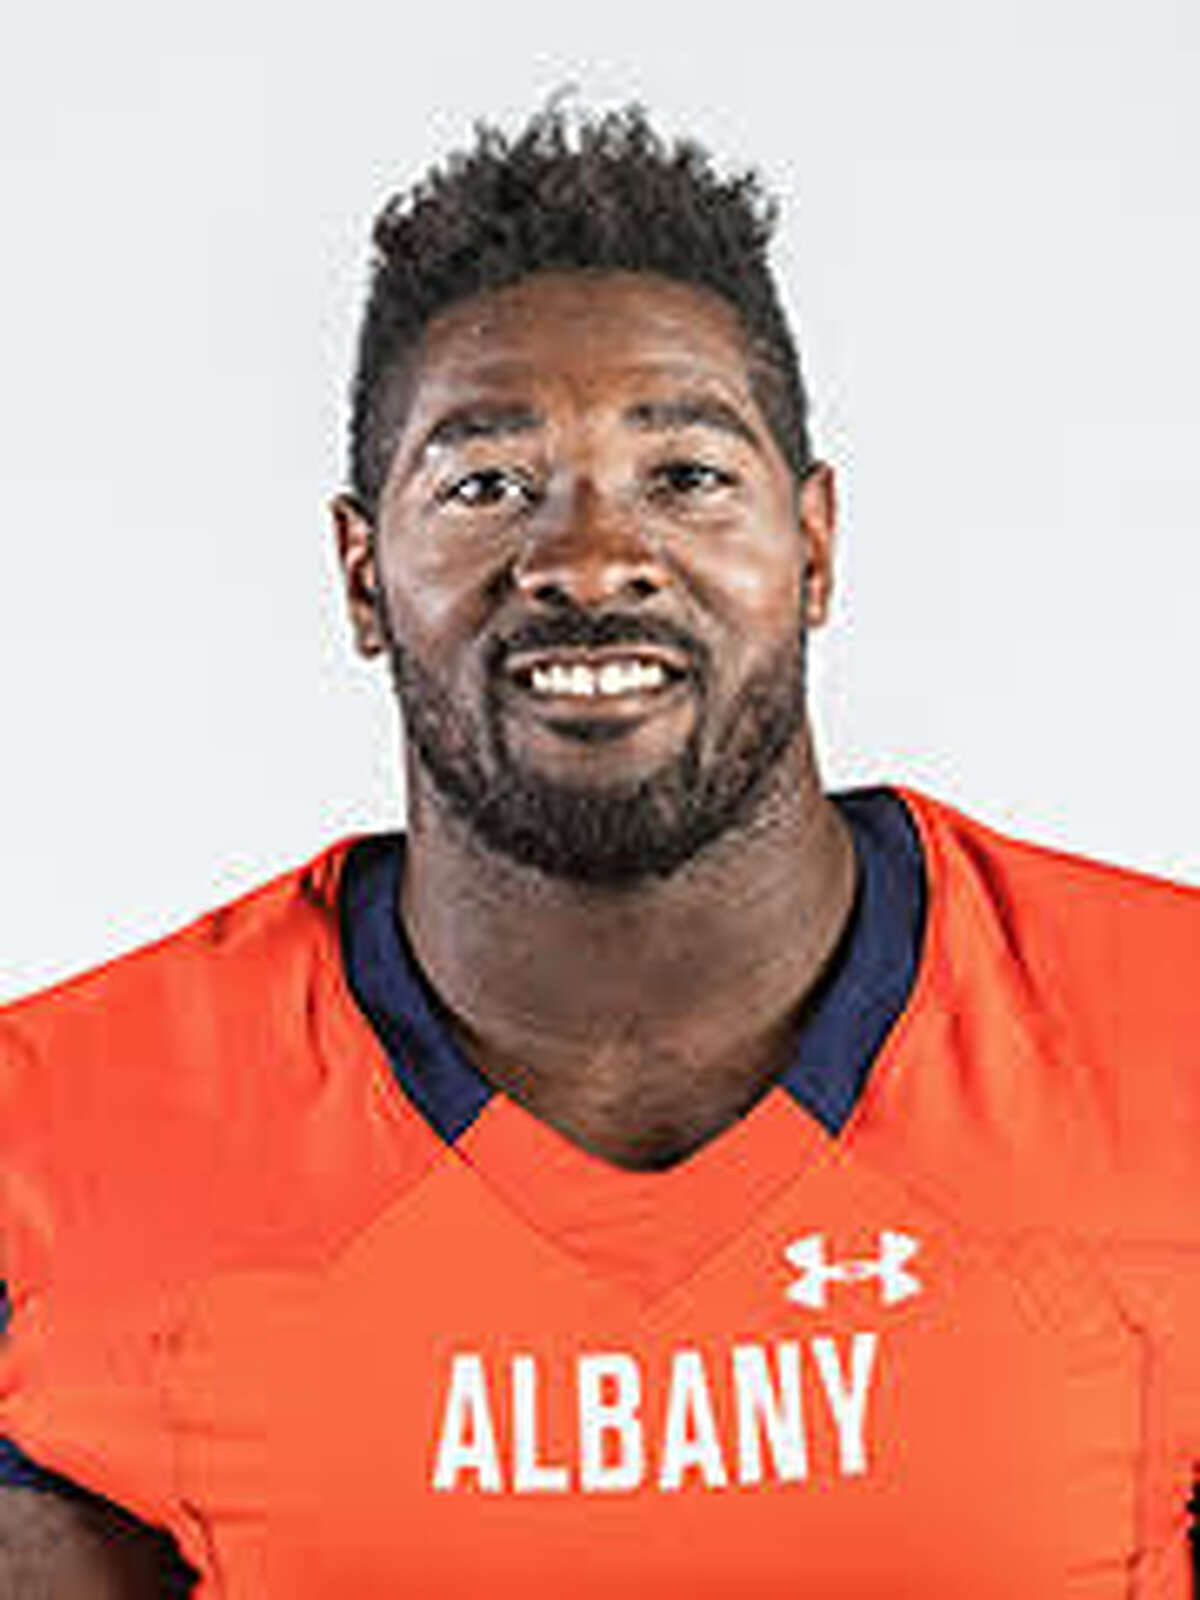 Albany Empire add 21 players to roster